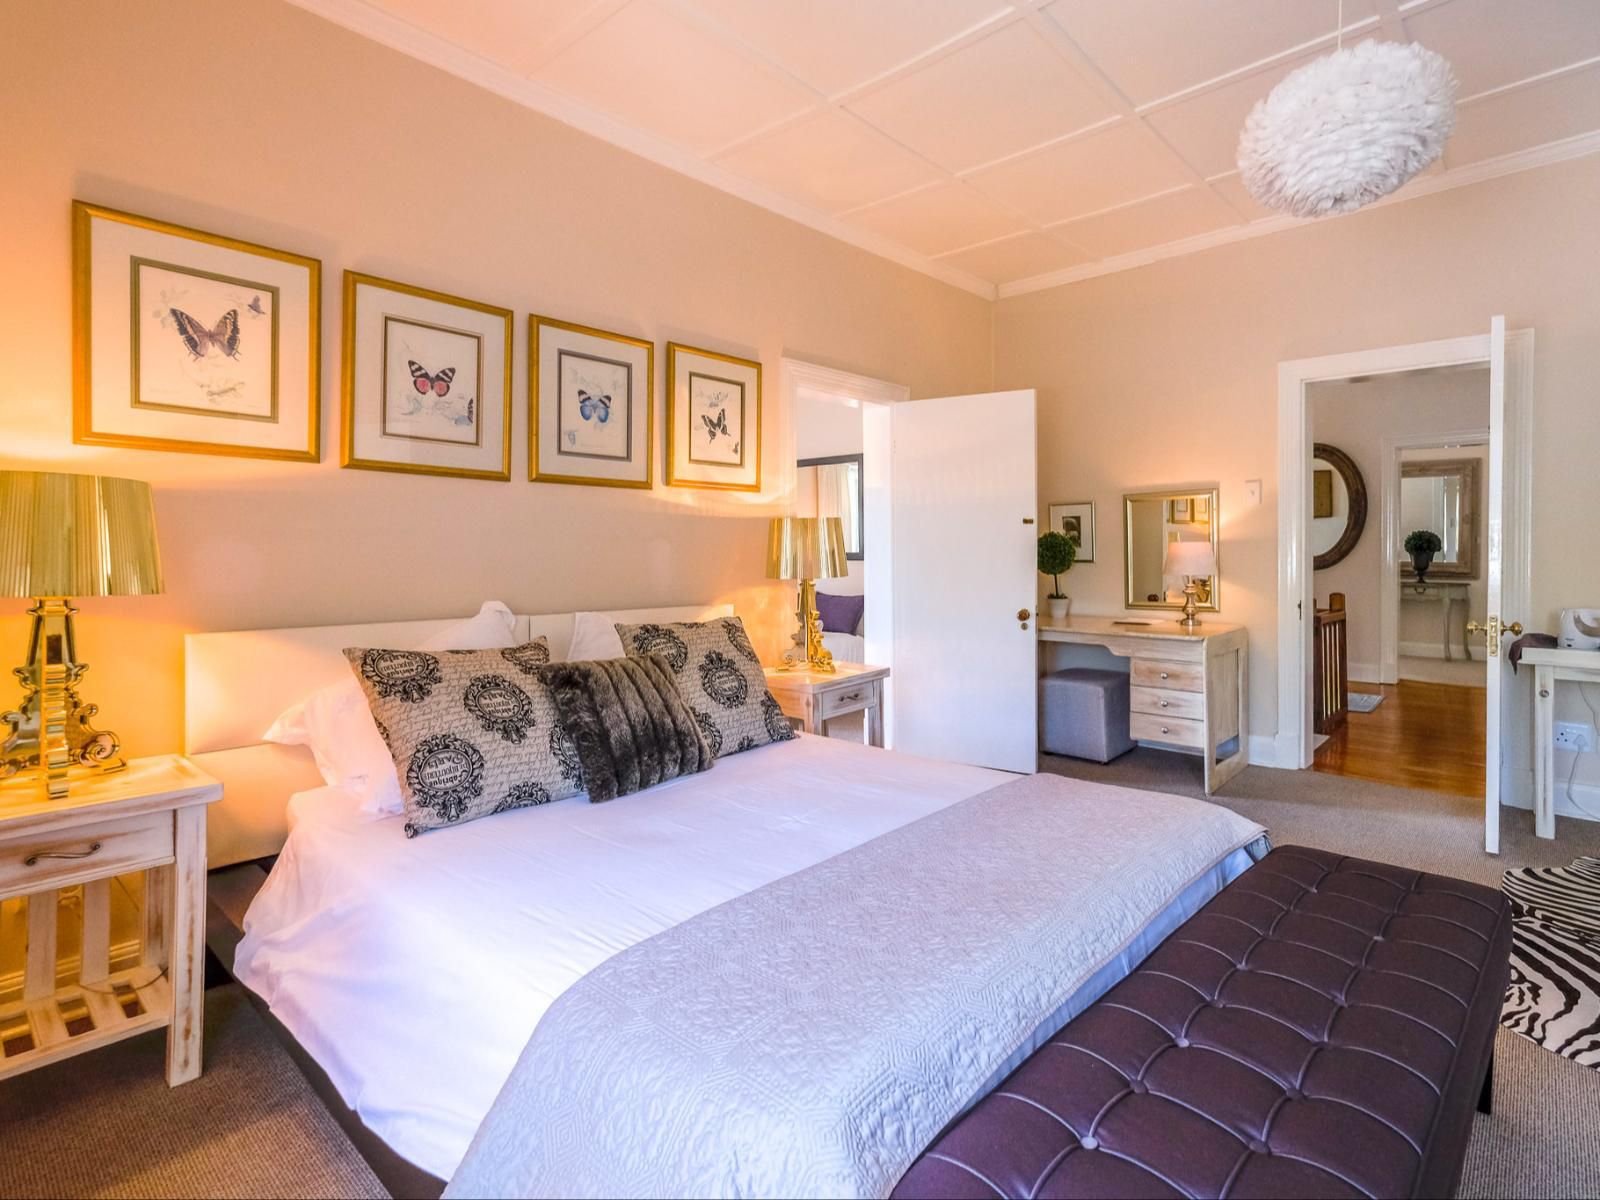 No 10 Caledon Street Guest House Camphers Drift George Western Cape South Africa Complementary Colors, Bedroom